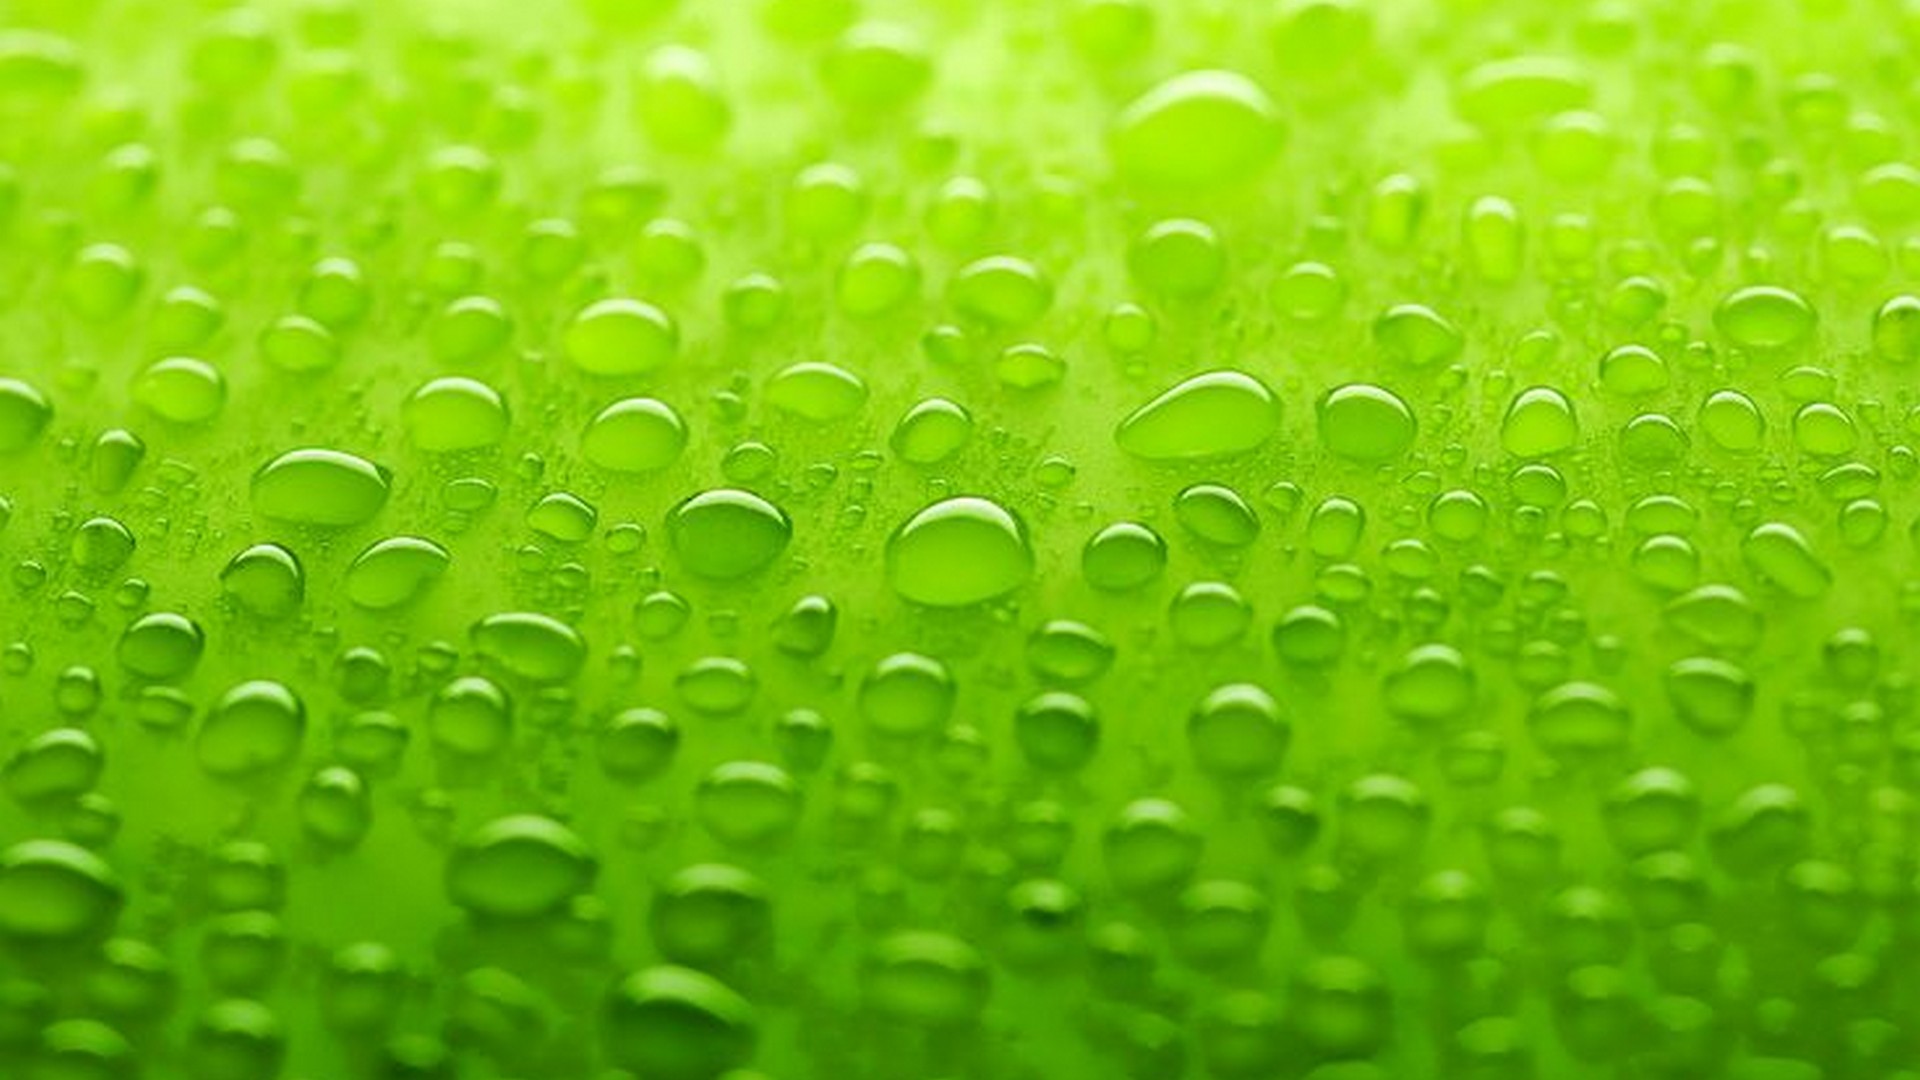 HD Lime Green Backgrounds with resolution 1920X1080 pixel. You can use this wallpaper as background for your desktop Computer Screensavers, Android or iPhone smartphones